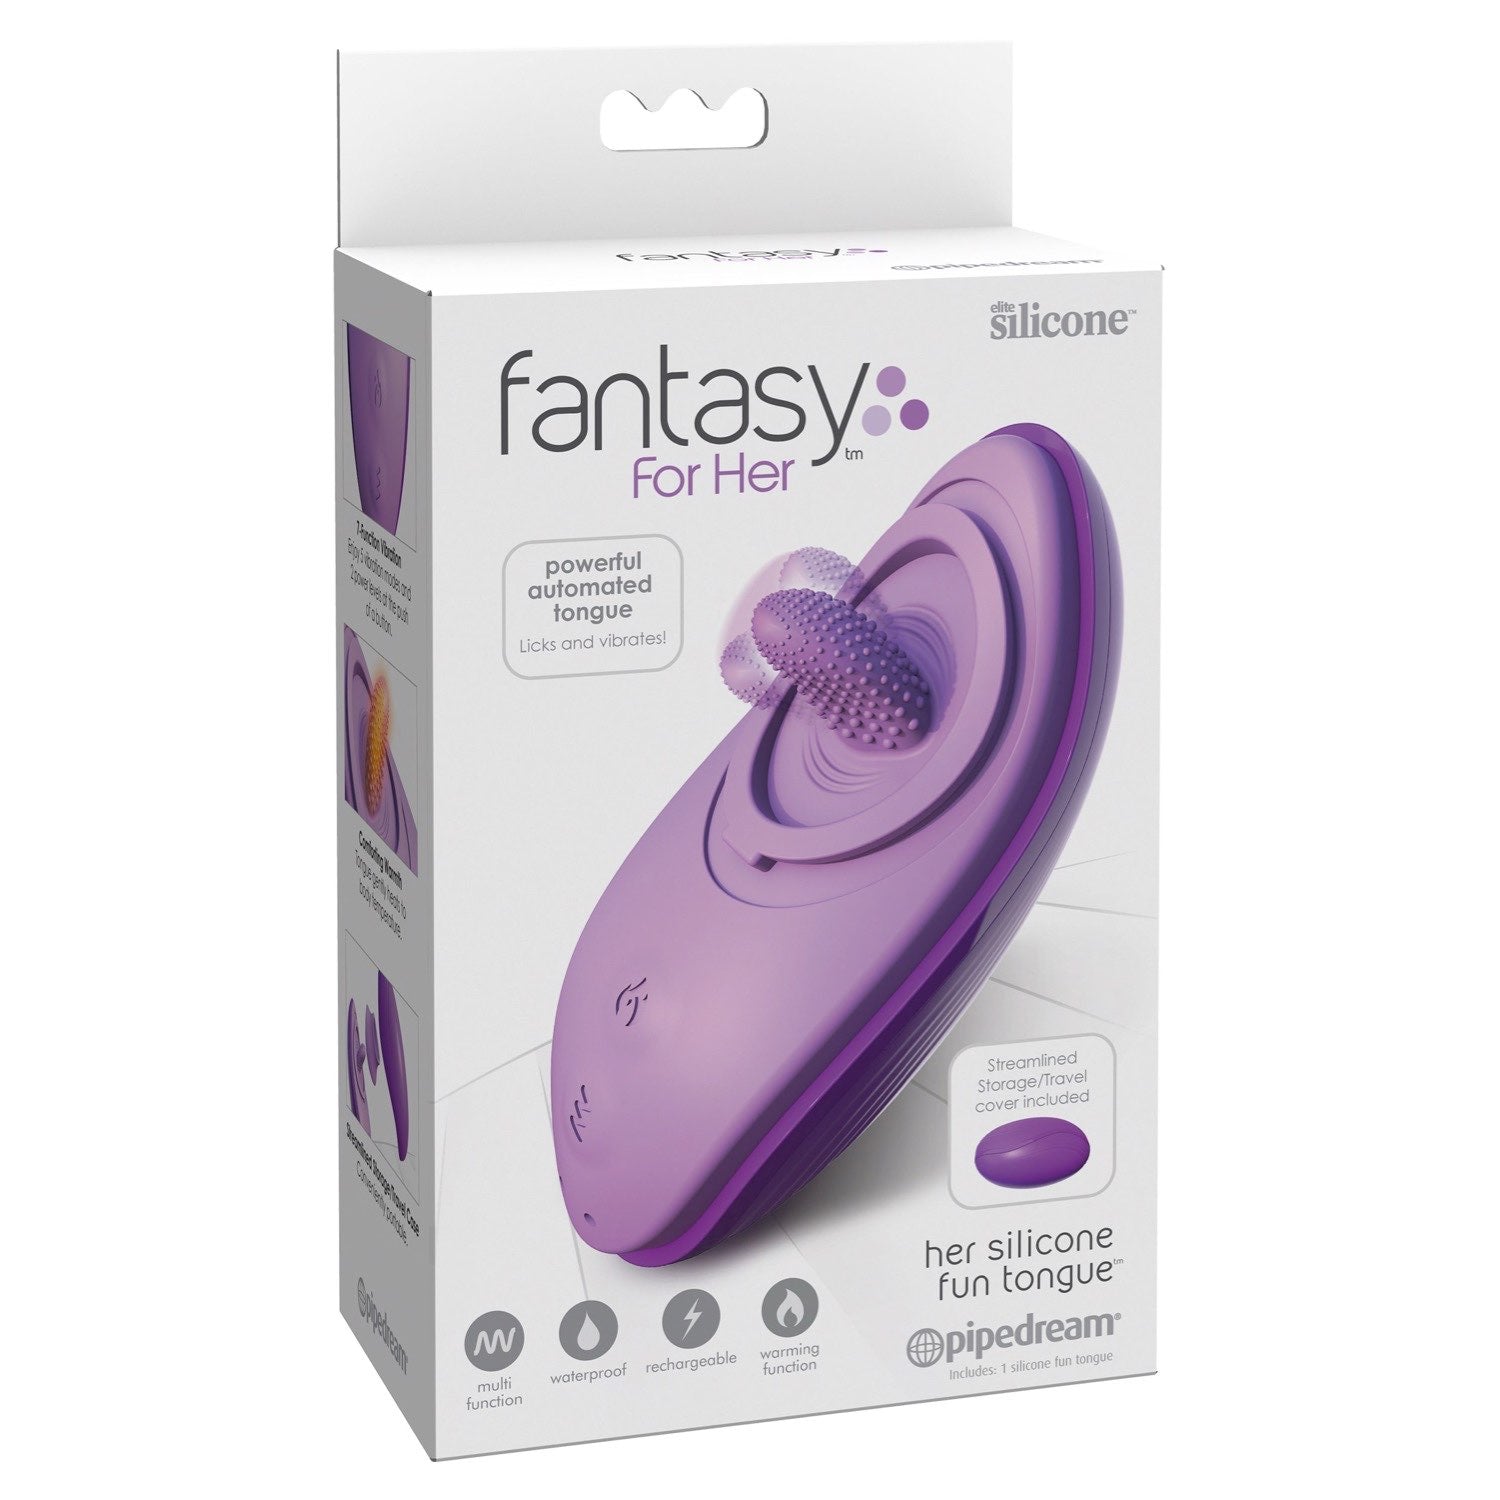 Fantasy For Her Silicone Fun Tongue - Purple USB Rechargeable Flicking Stimulator by Pipedream